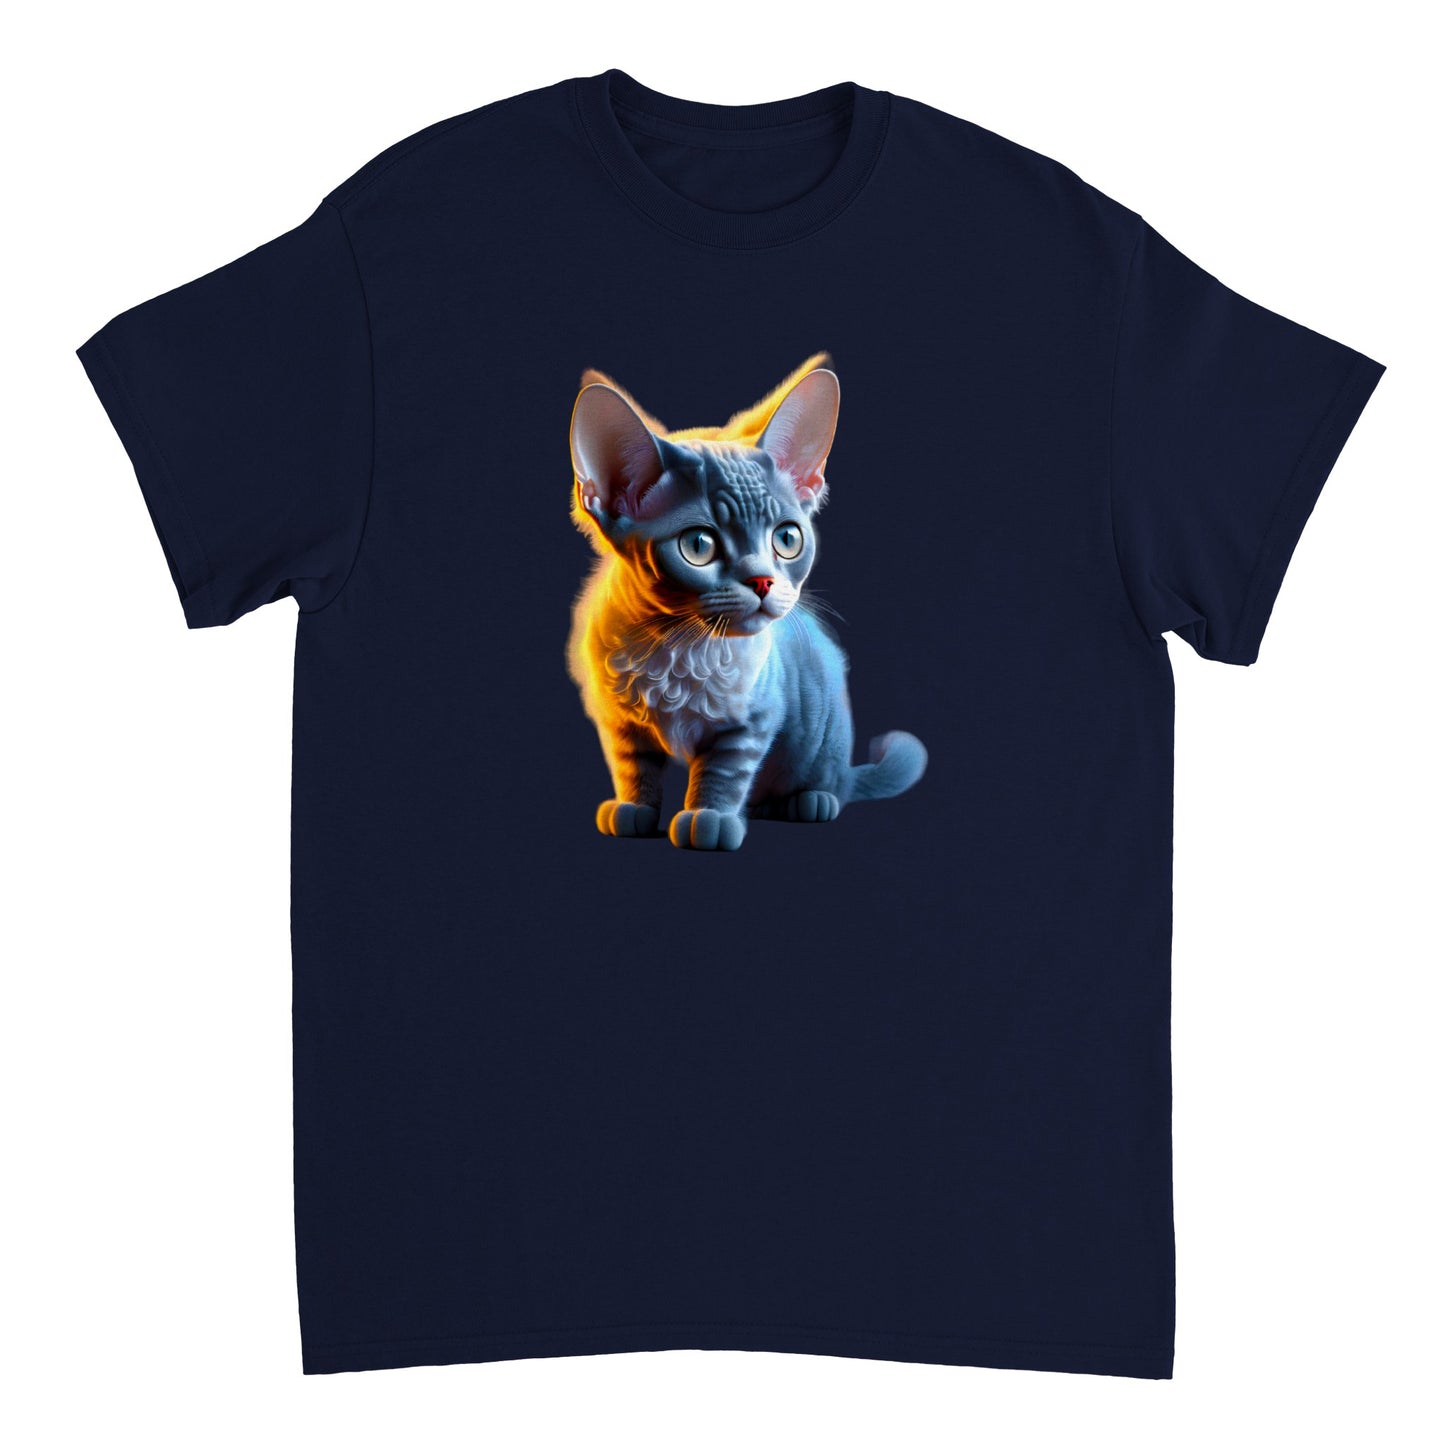 Adorable, Cool, Cute Cats and Kittens Toy - Heavyweight Unisex Crewneck T-shirt 17